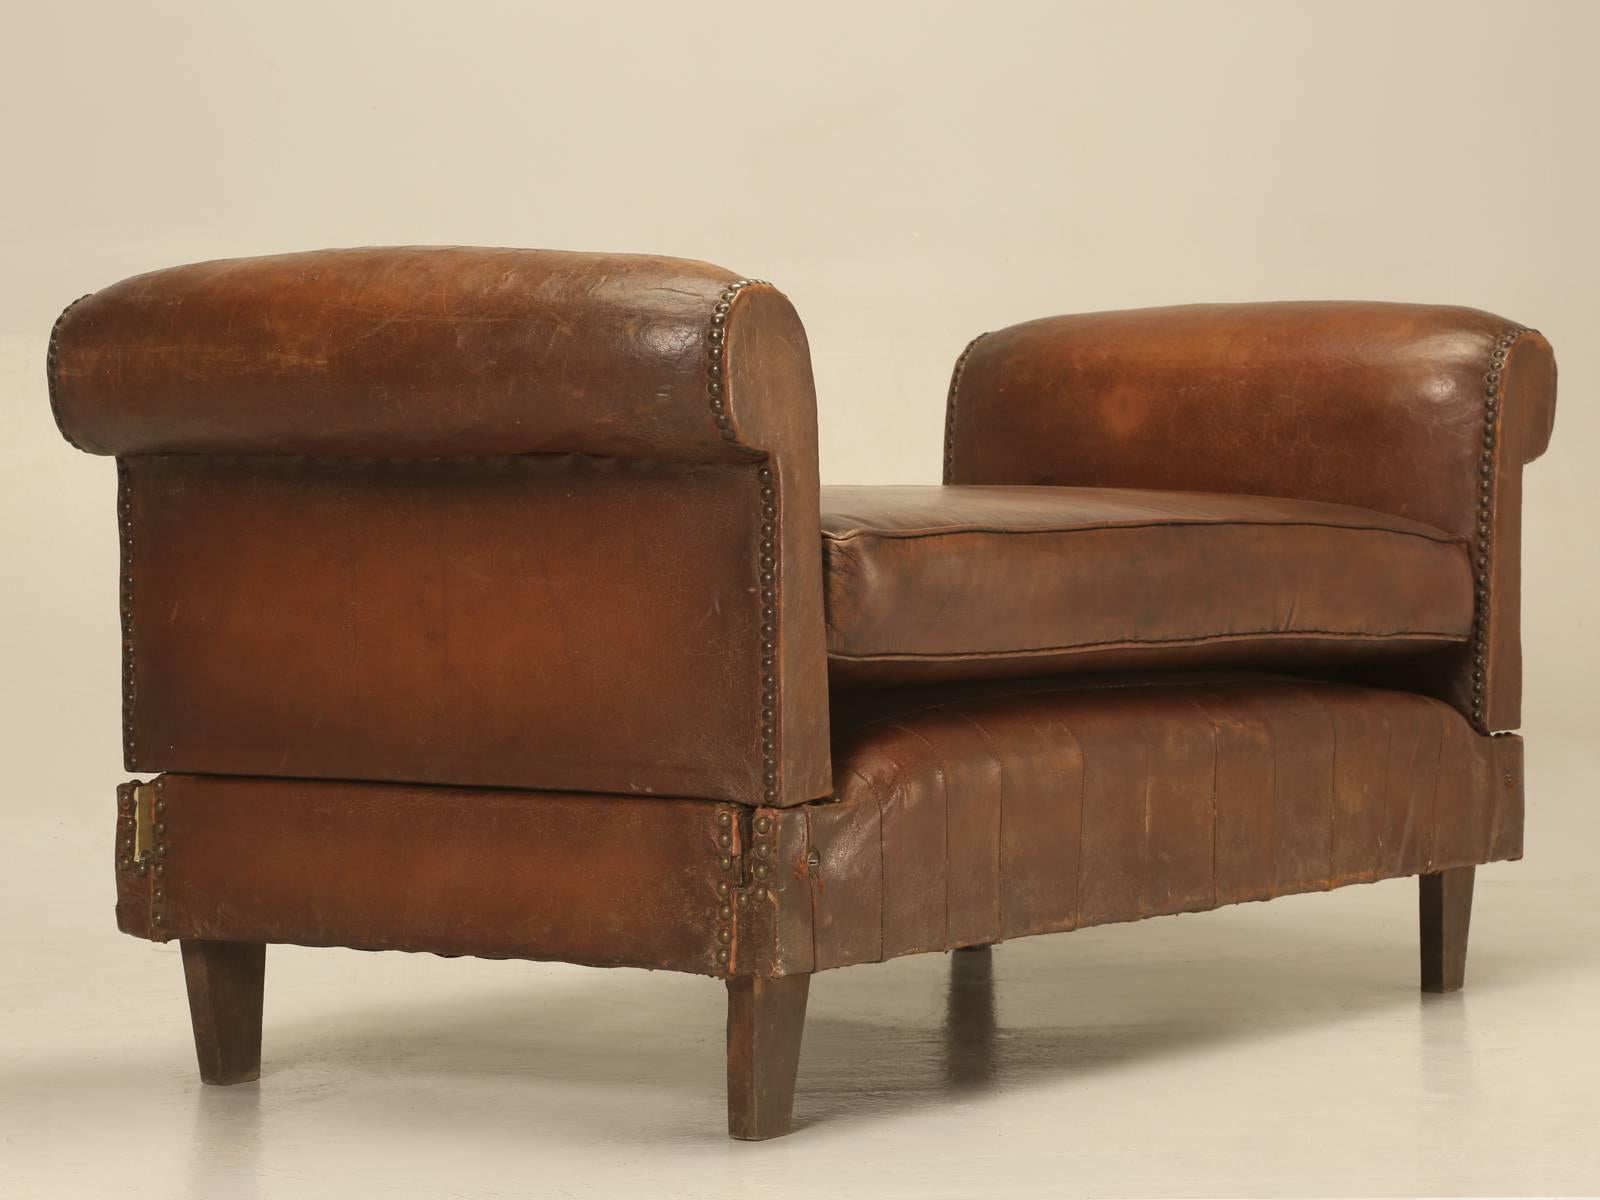 Mid-20th Century Antique French Leather Day Bed, circa 1930s